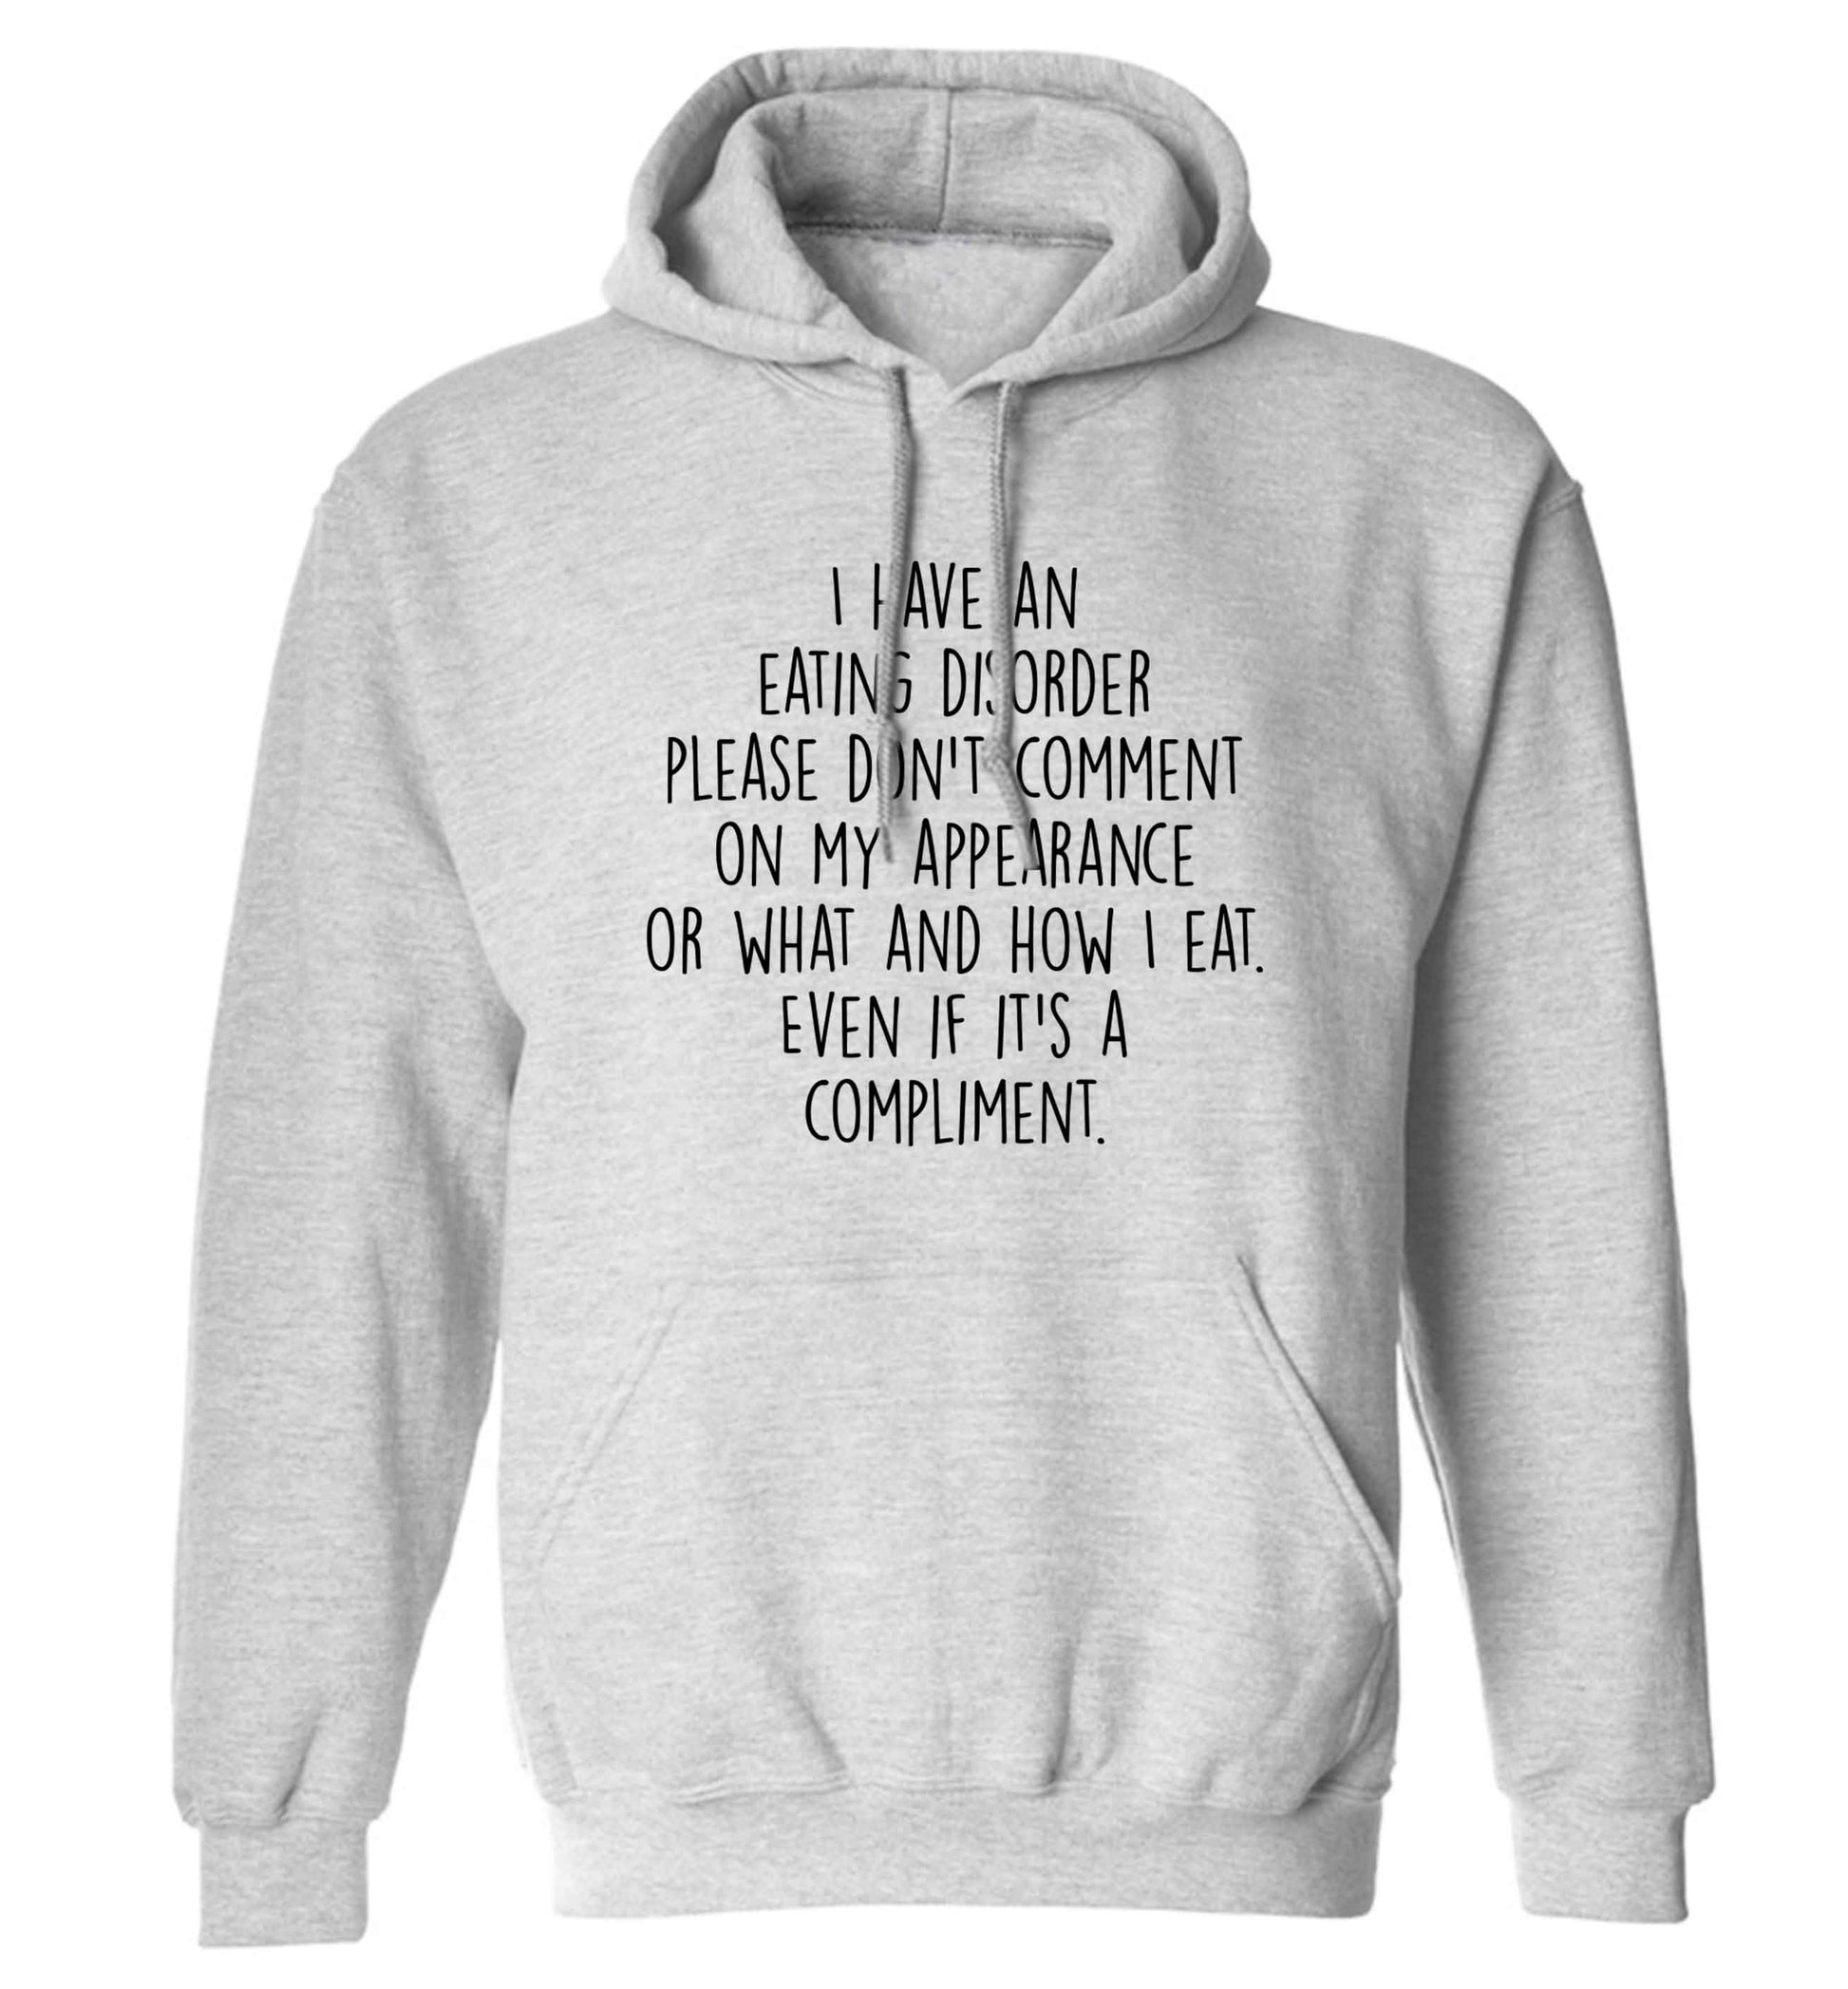 I have an eating disorder please don't comment on my appearance or what and how I eat. Even if it's a compliment adults unisex grey hoodie 2XL